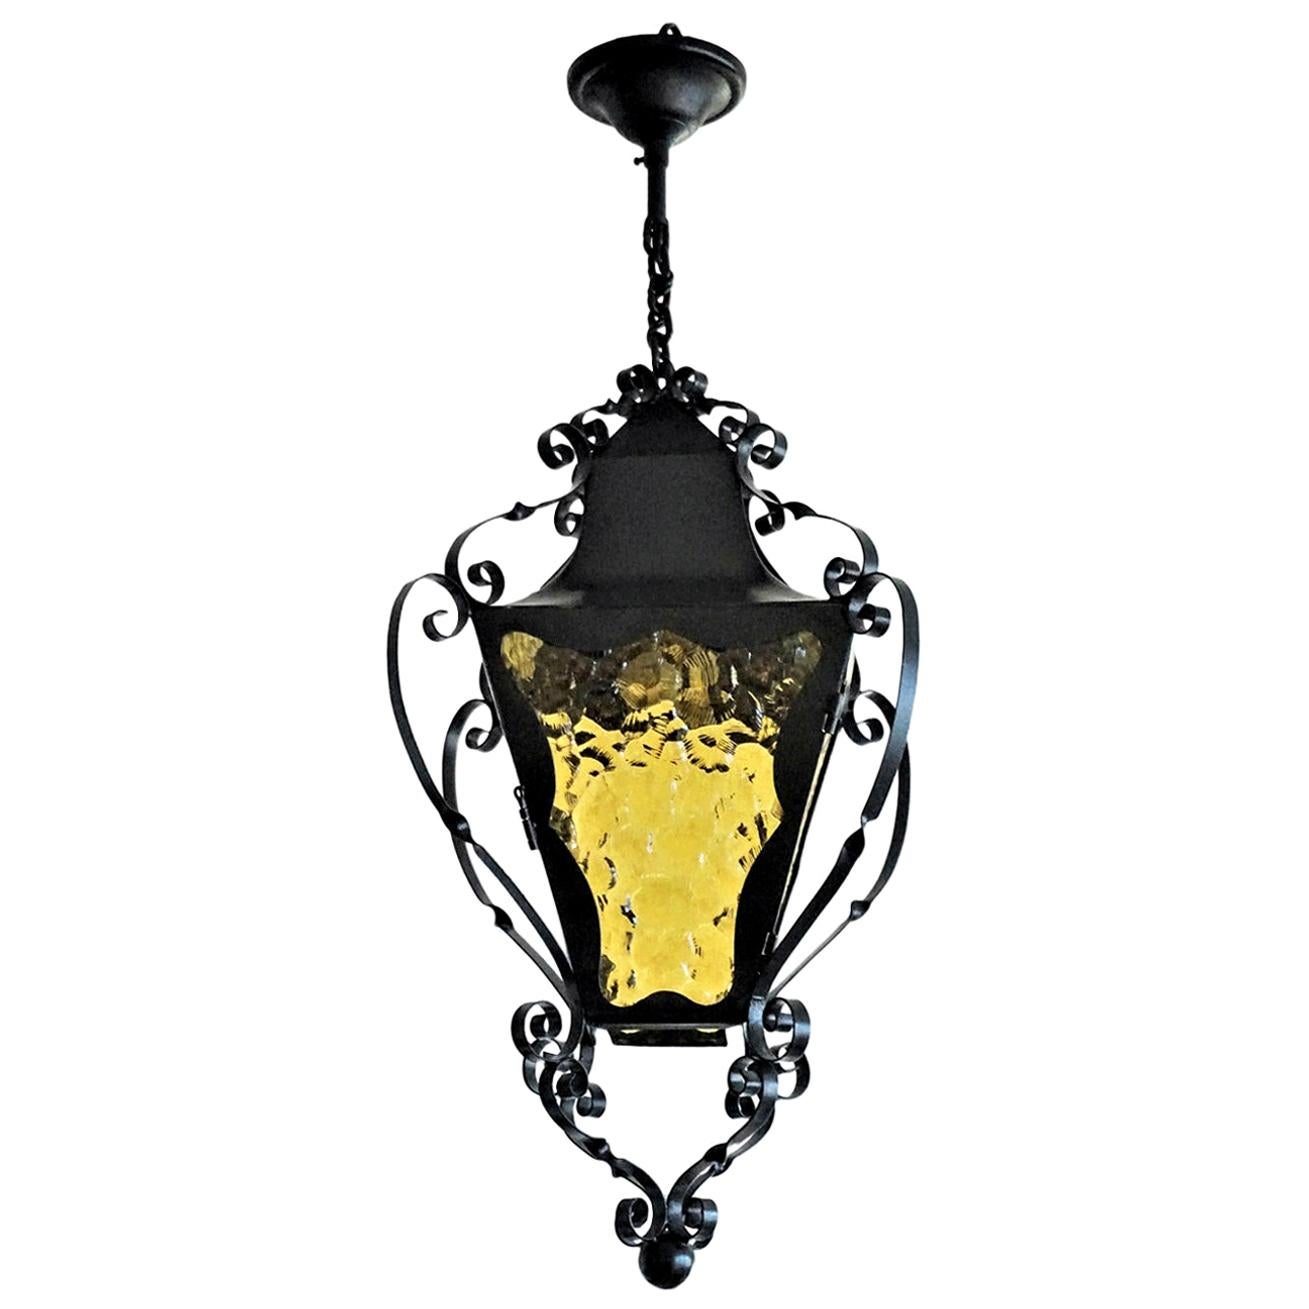 French Wrought Iron Lantern with Colored Glass, Early 20th Century